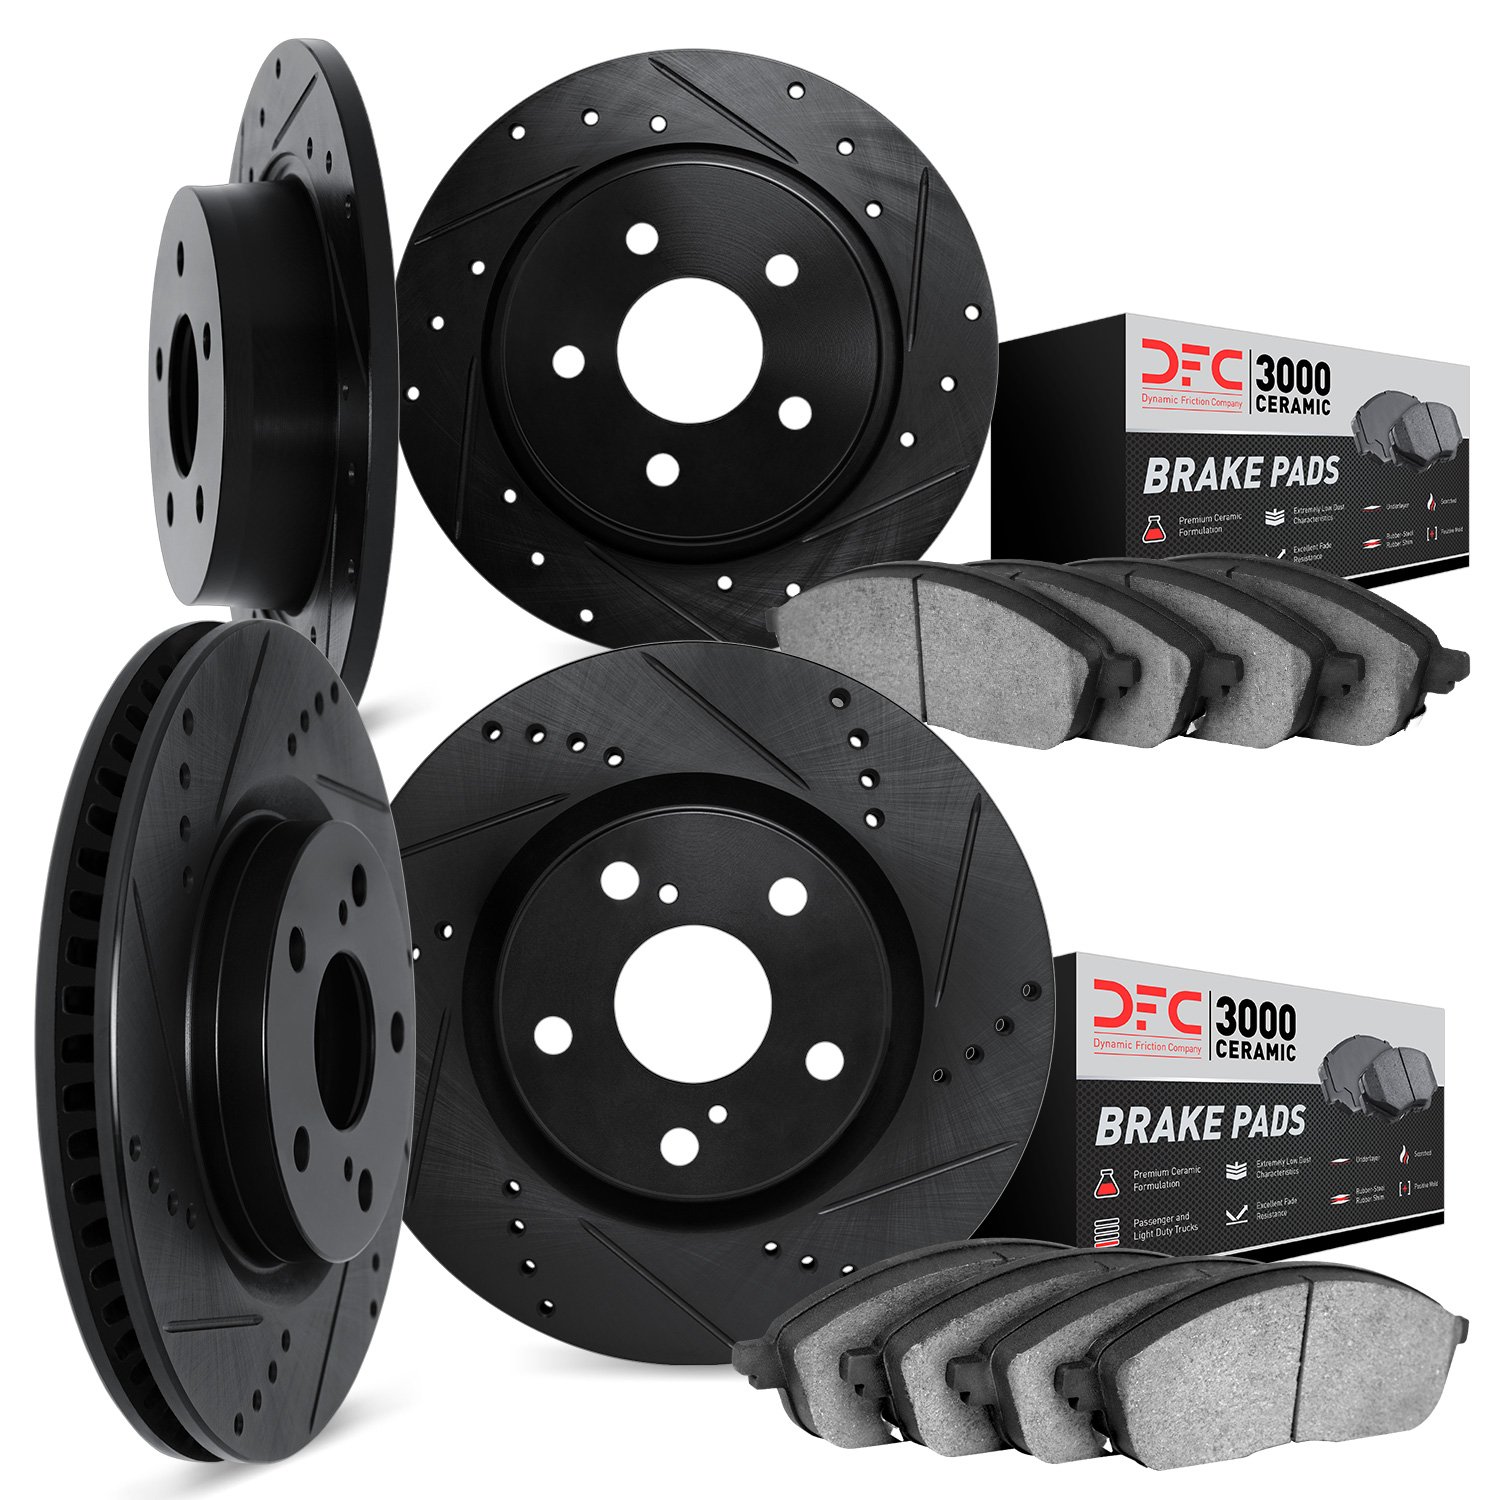 8304-27032 Drilled/Slotted Brake Rotors with 3000-Series Ceramic Brake Pads Kit [Black], 1995-1995 Volvo, Position: Front and Re